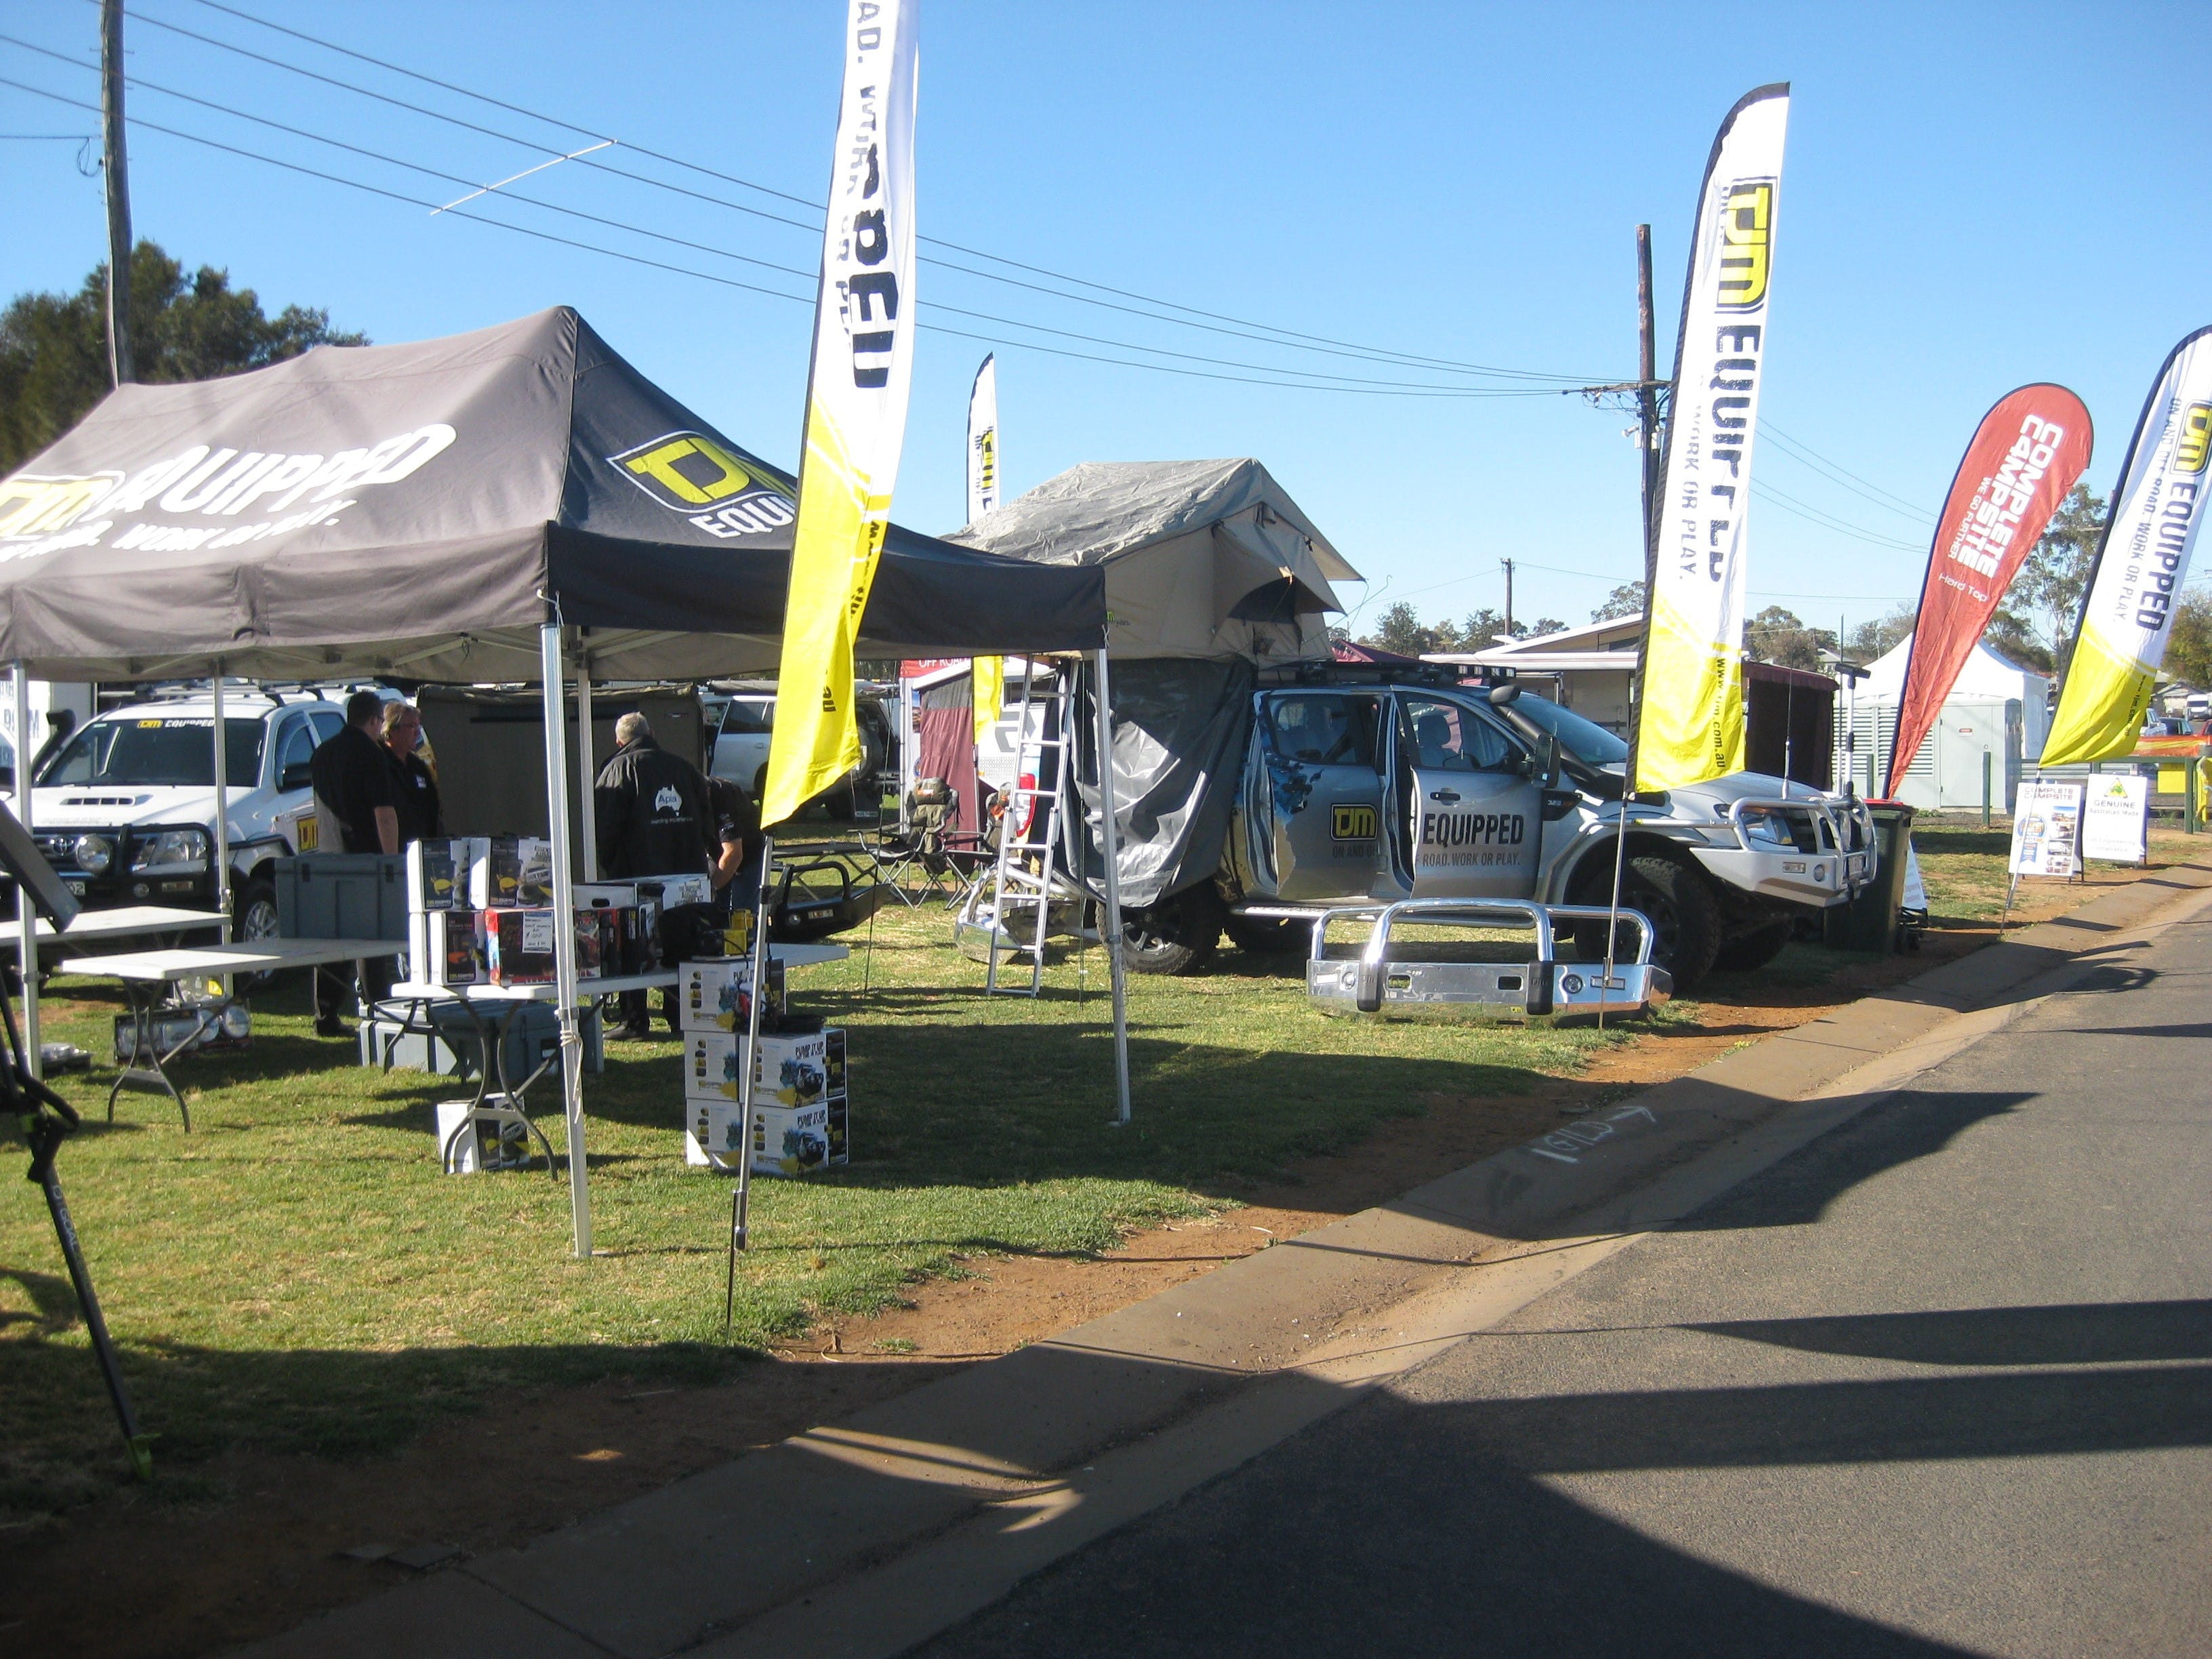 Orana Caravan Camping 4WD Fish and Boat Show - Melbourne Tourism